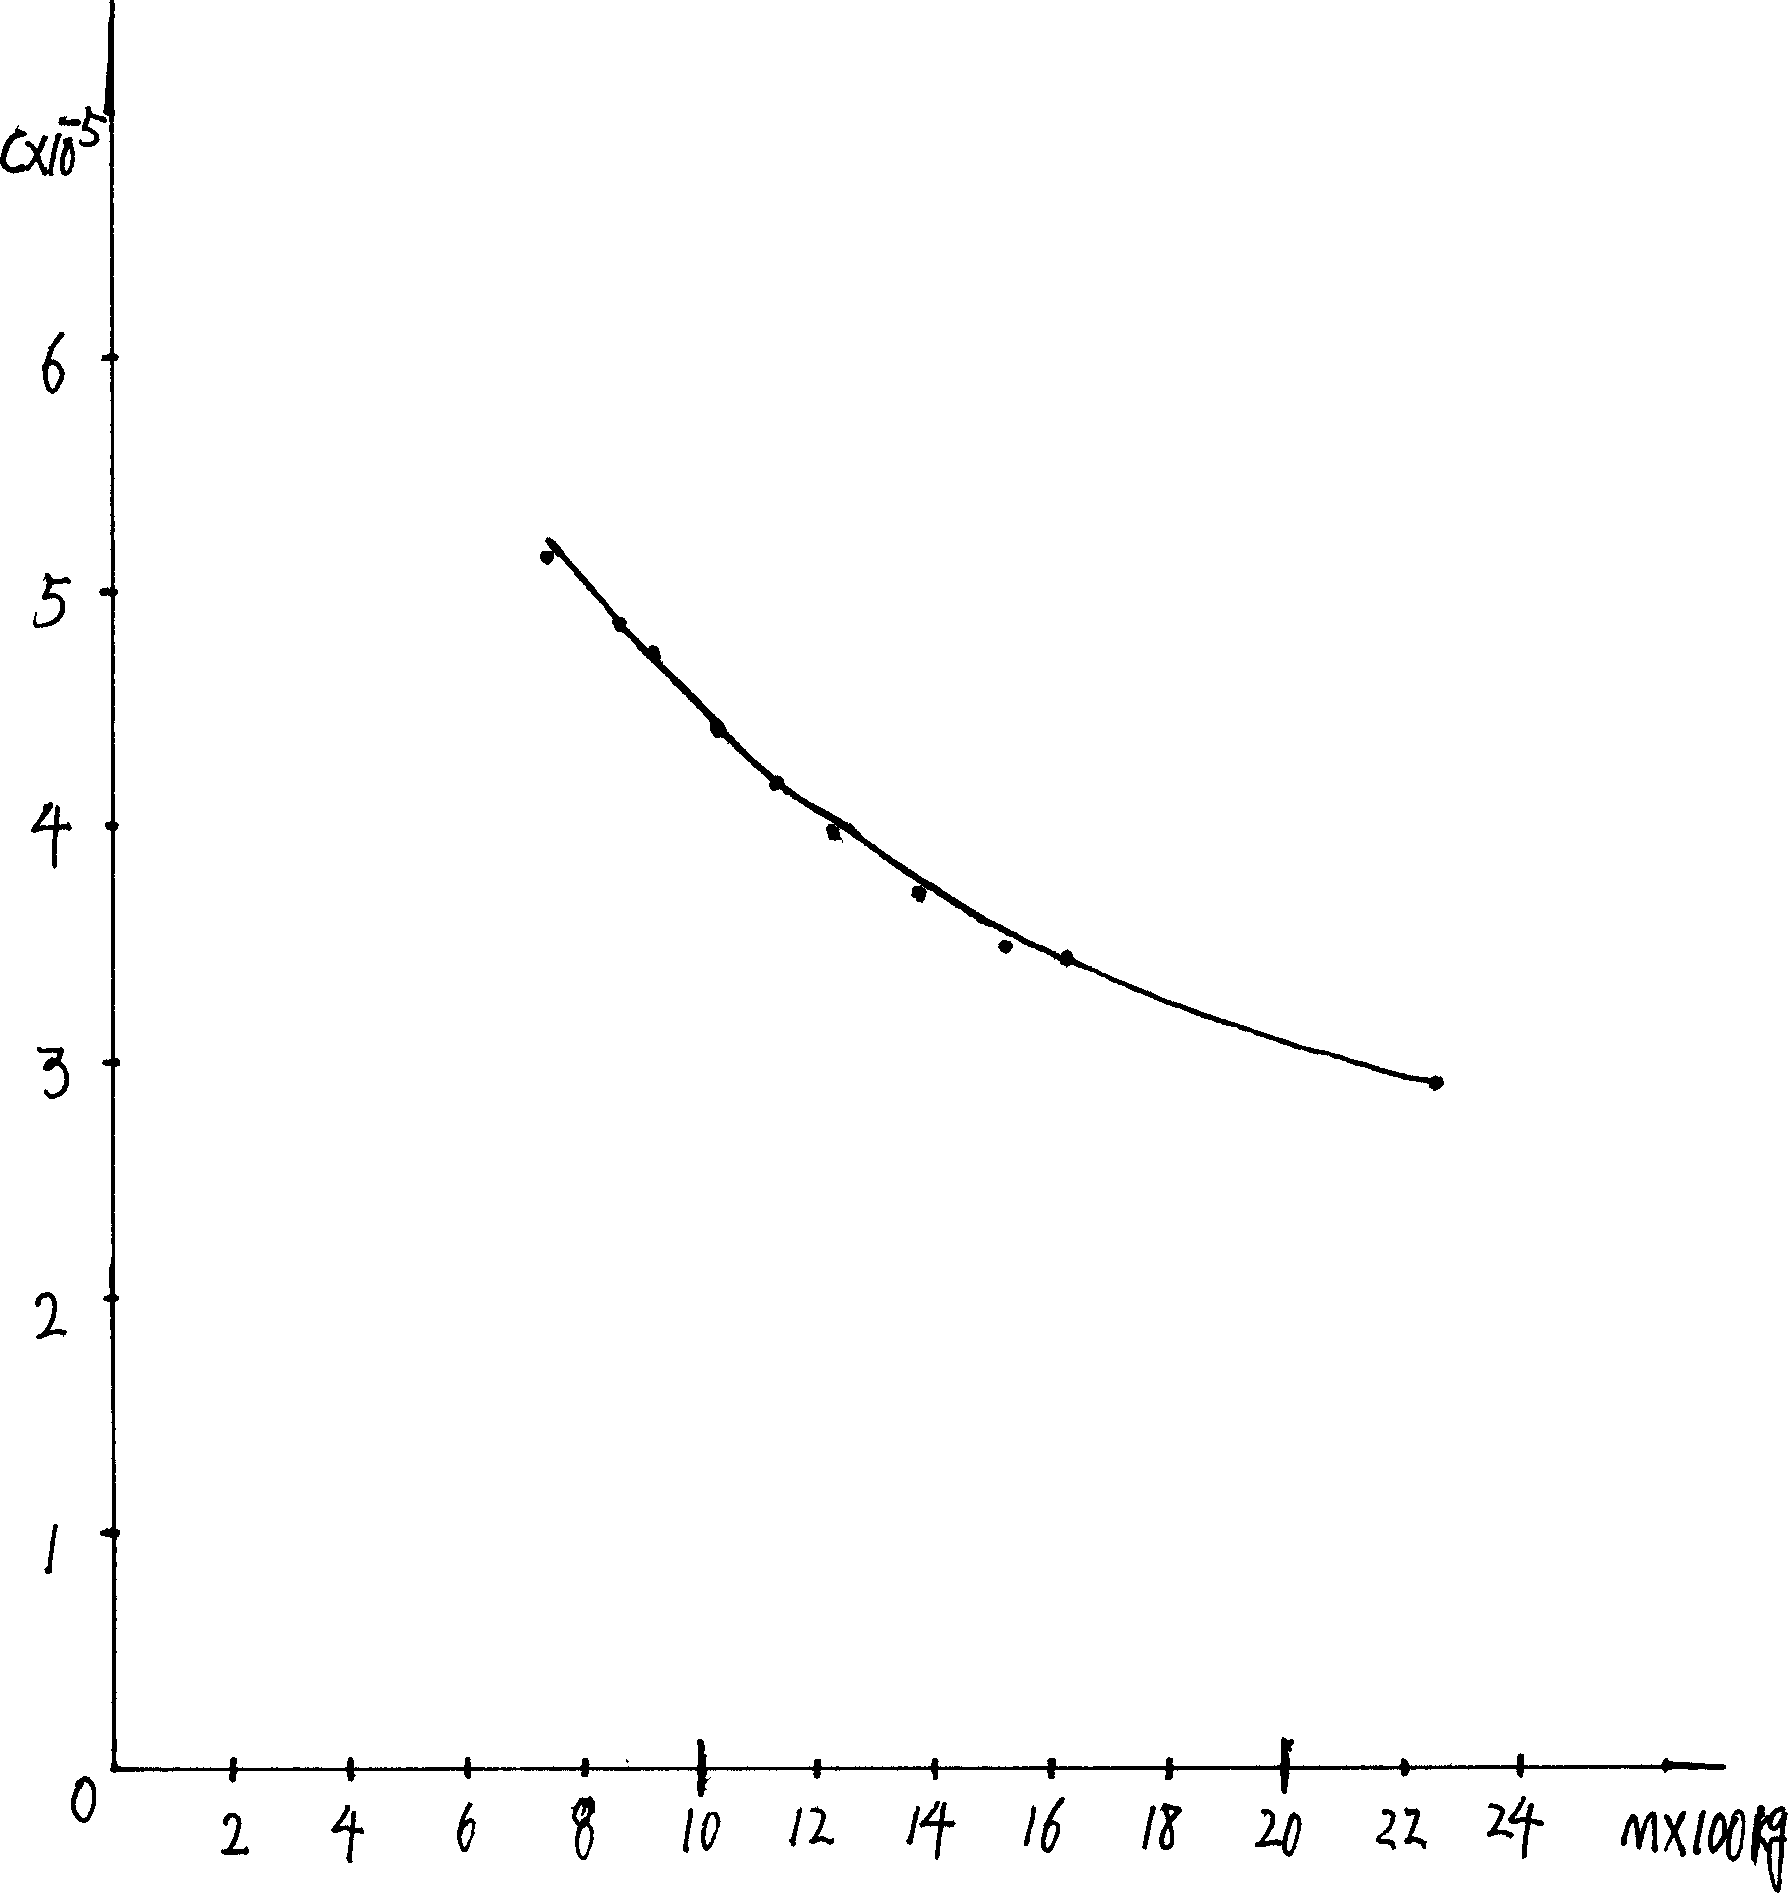 Statistical method of system resistance based on road test and bench test about car in free running at neutral position